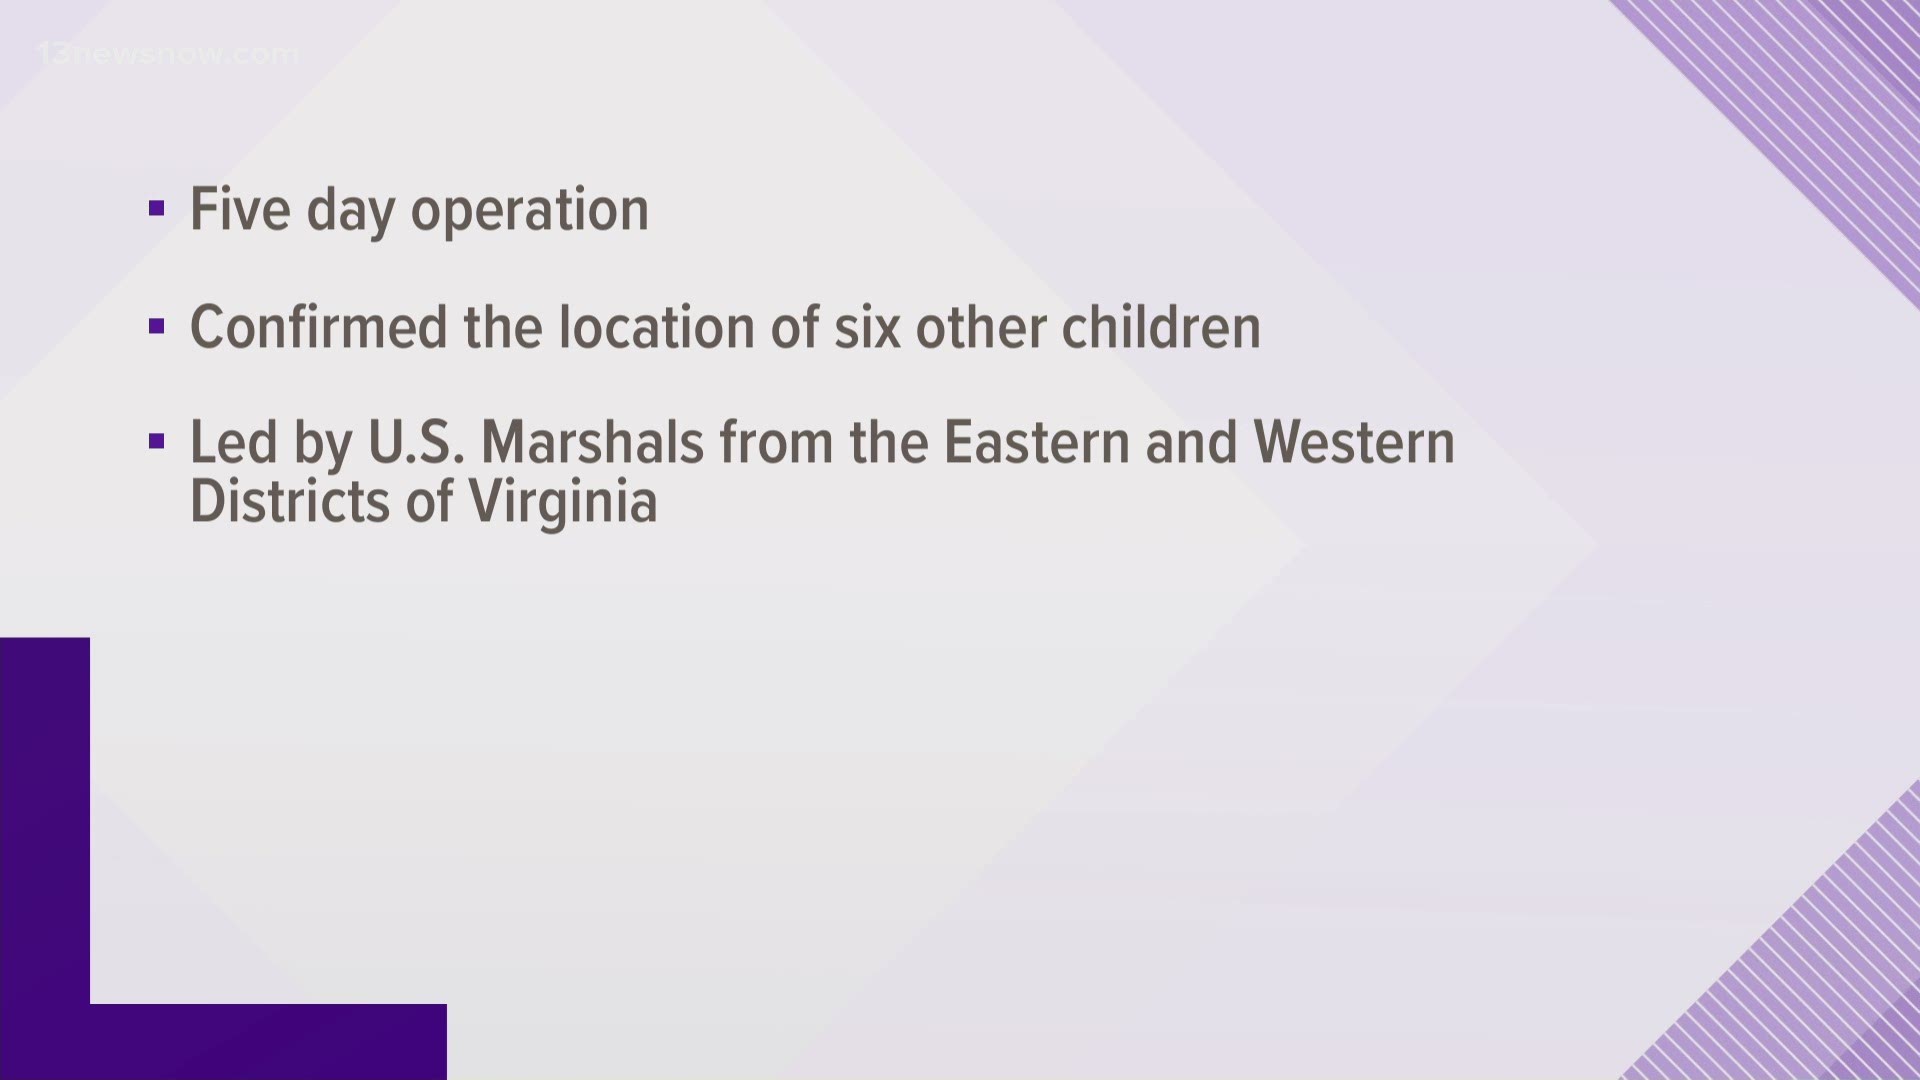 Hampton, Norfolk, Portsmouth, and Virginia Beach police departments also assisted in the operation that located 27 missing children in the state.